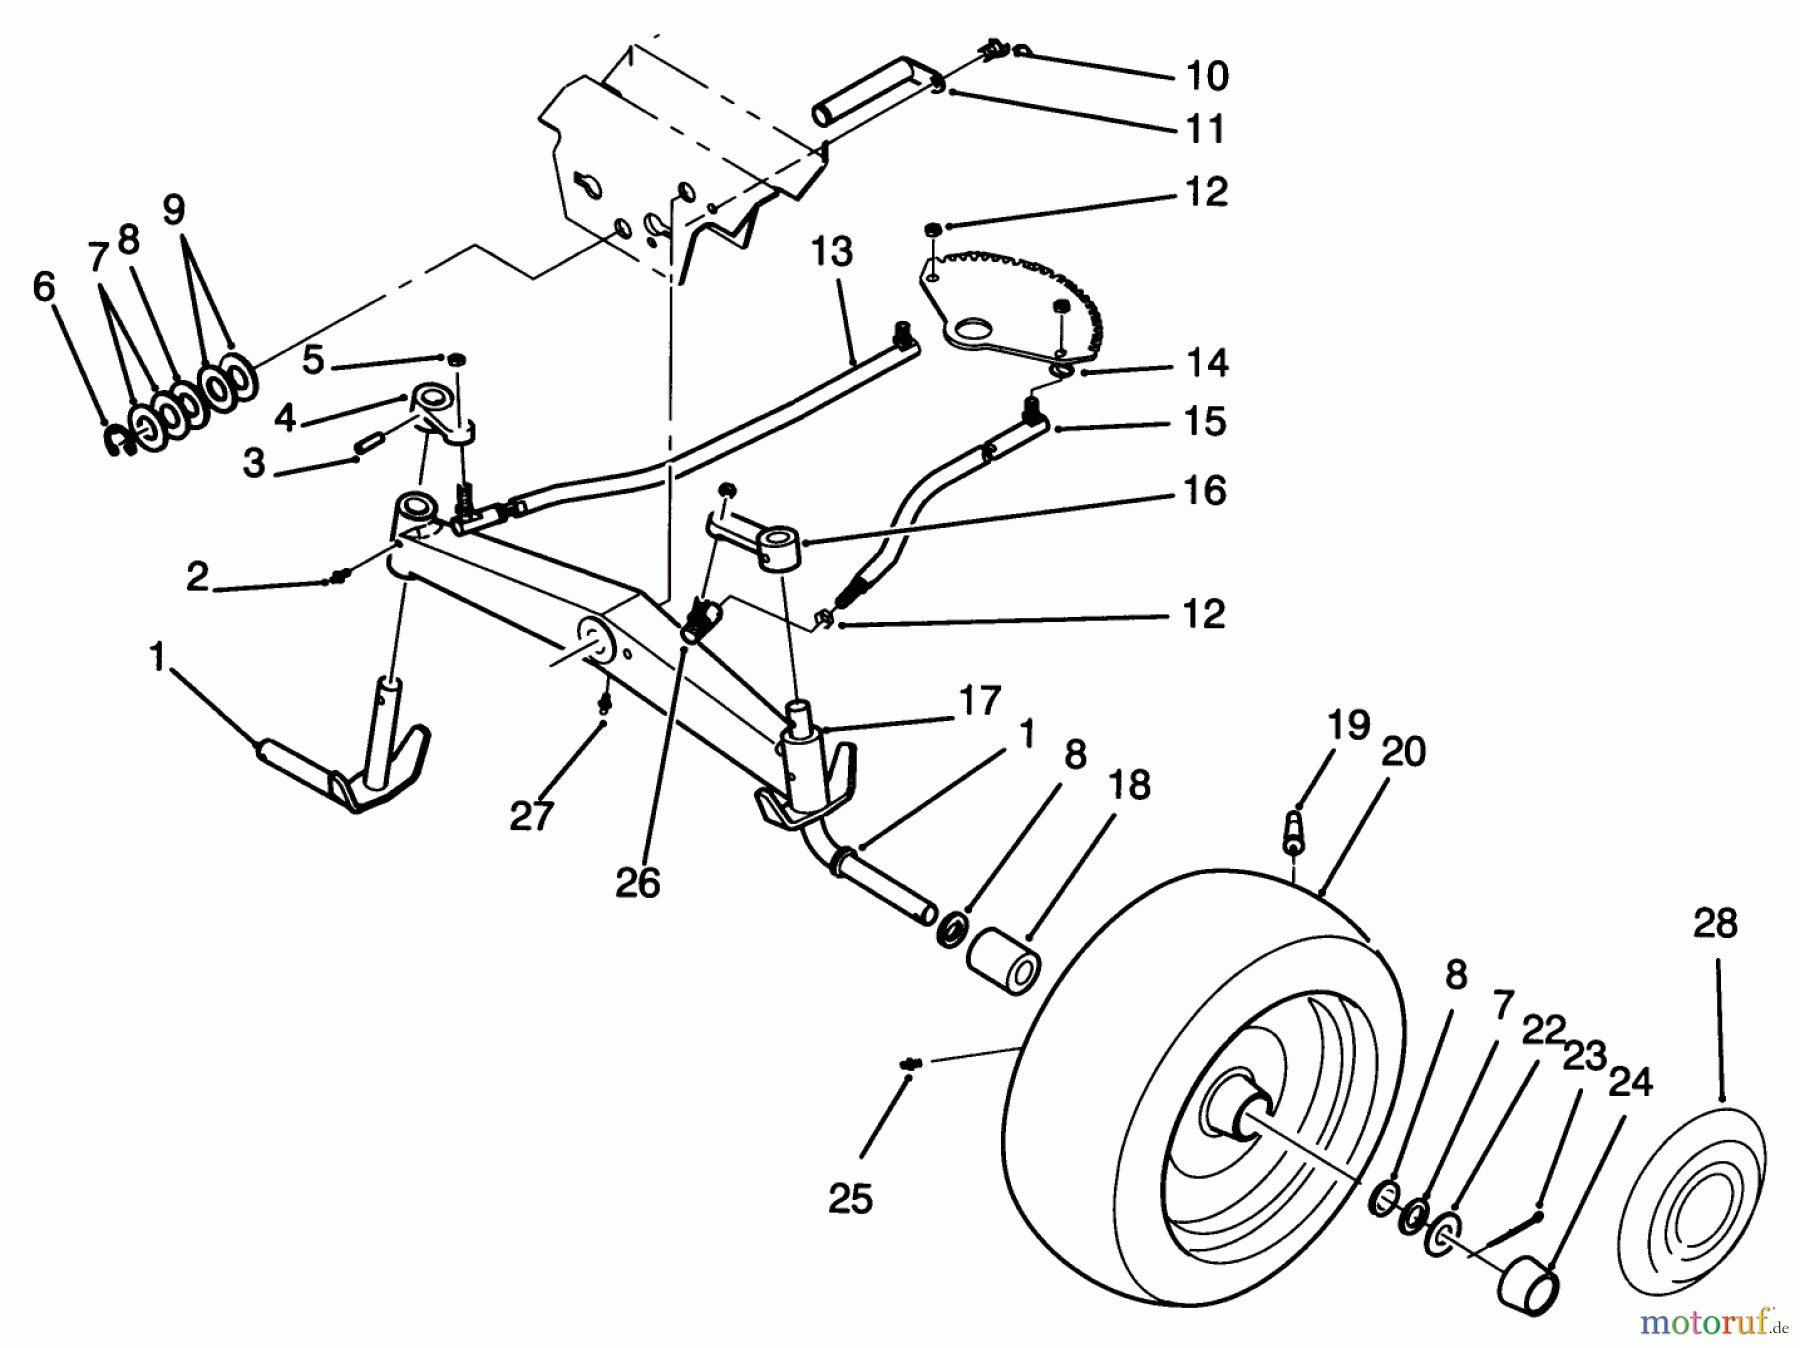  Toro Neu Mowers, Lawn & Garden Tractor Seite 1 72101 (246-H) - Toro 246-H Yard Tractor, 1993 (3900001-3999999) FRONT AXLE ASSEMBLY